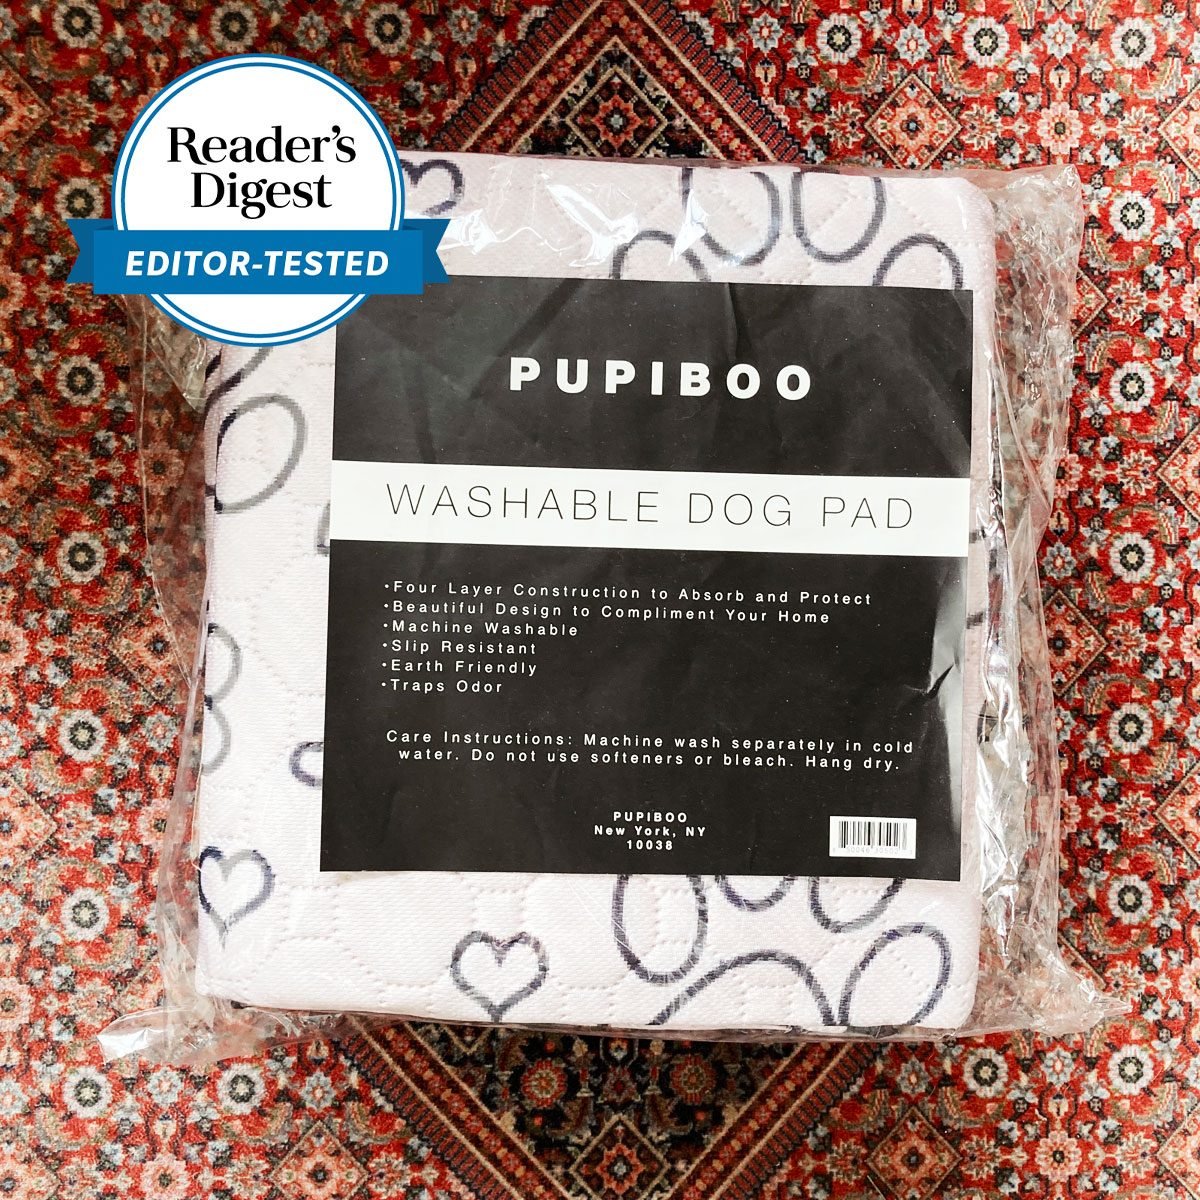 https://www.rd.com/wp-content/uploads/2023/05/RD-Editor-Tested-pupiboo-washable-dog-pads.jpg